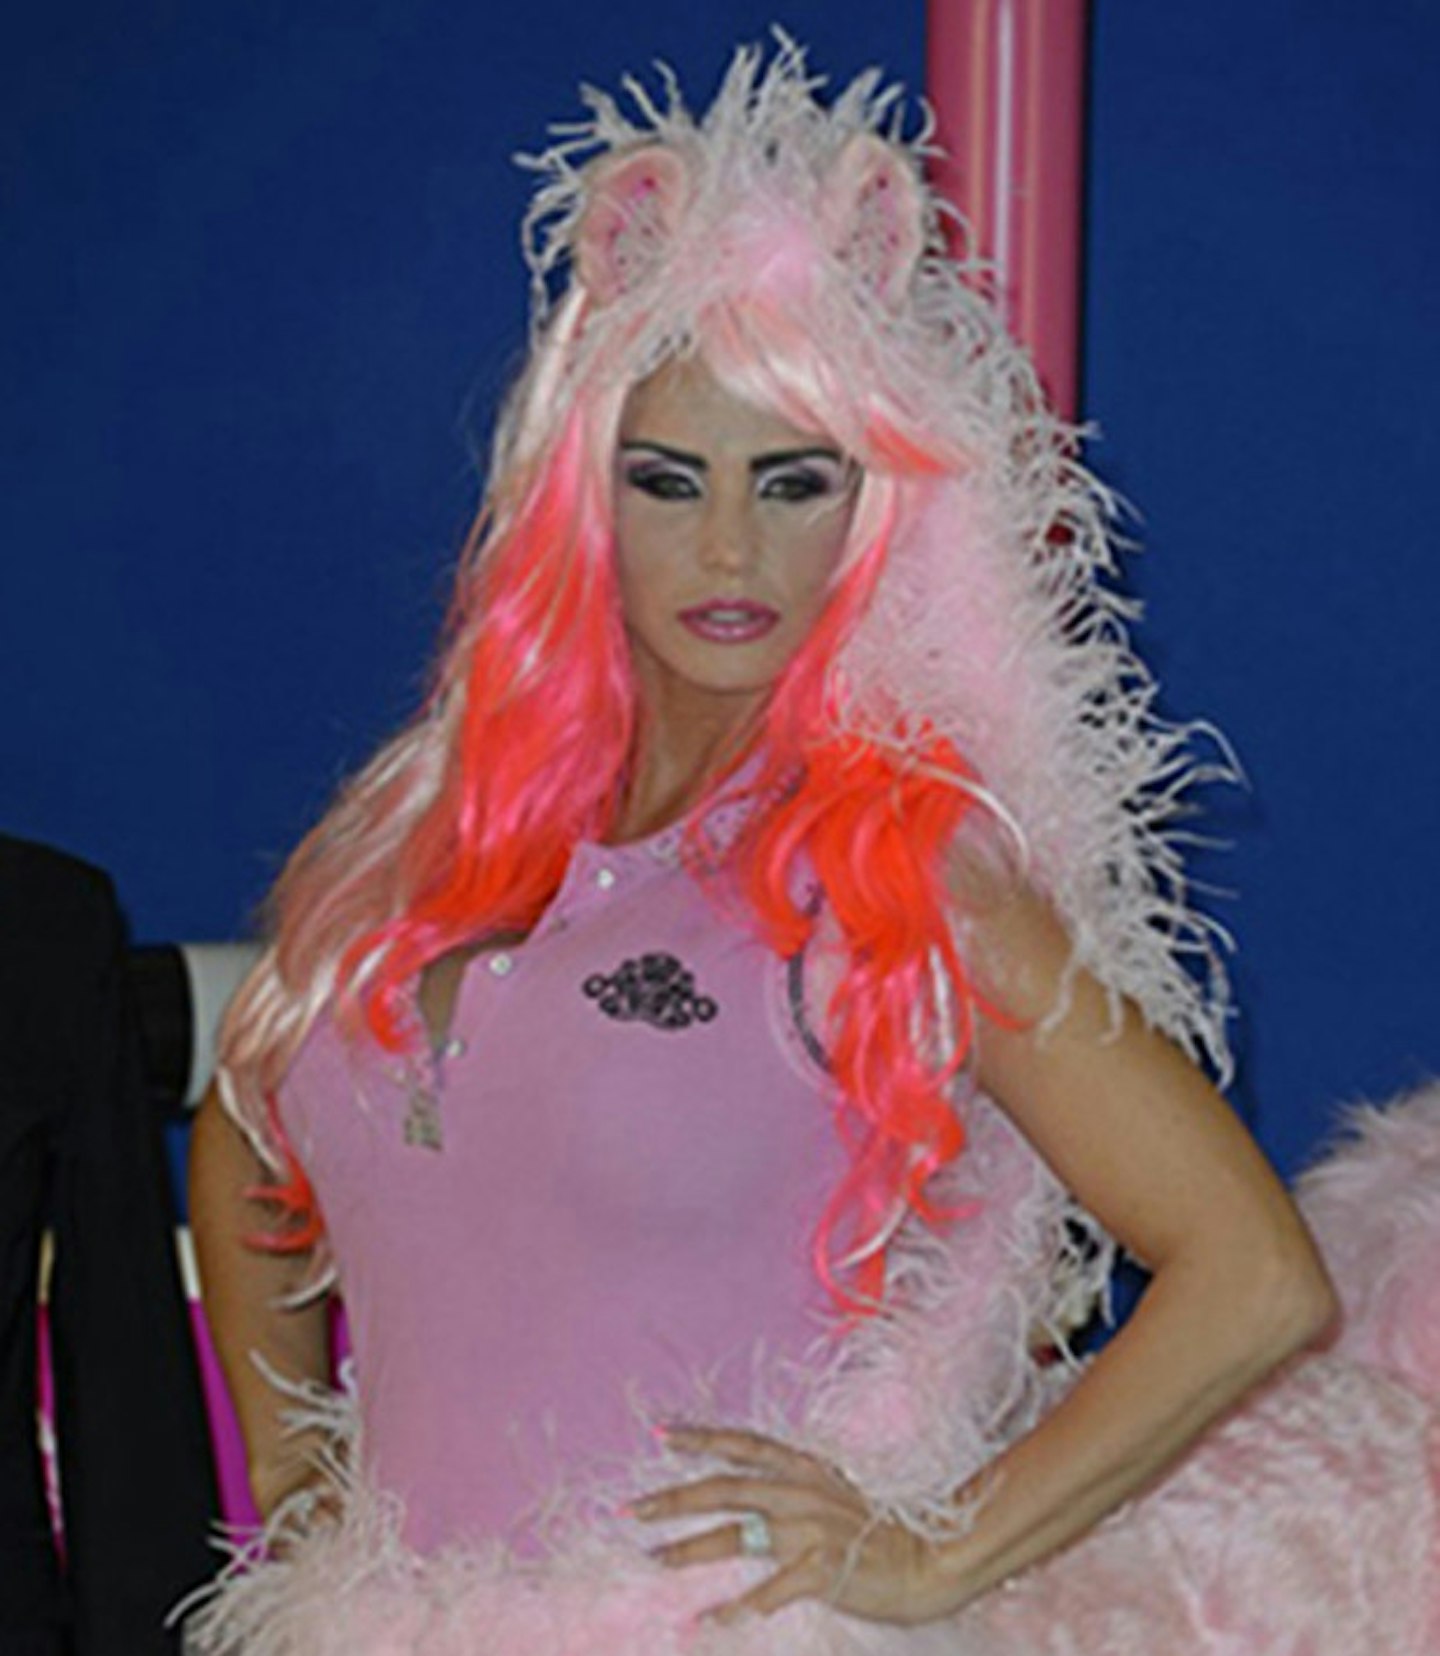 Katie Price: 26th March 2013